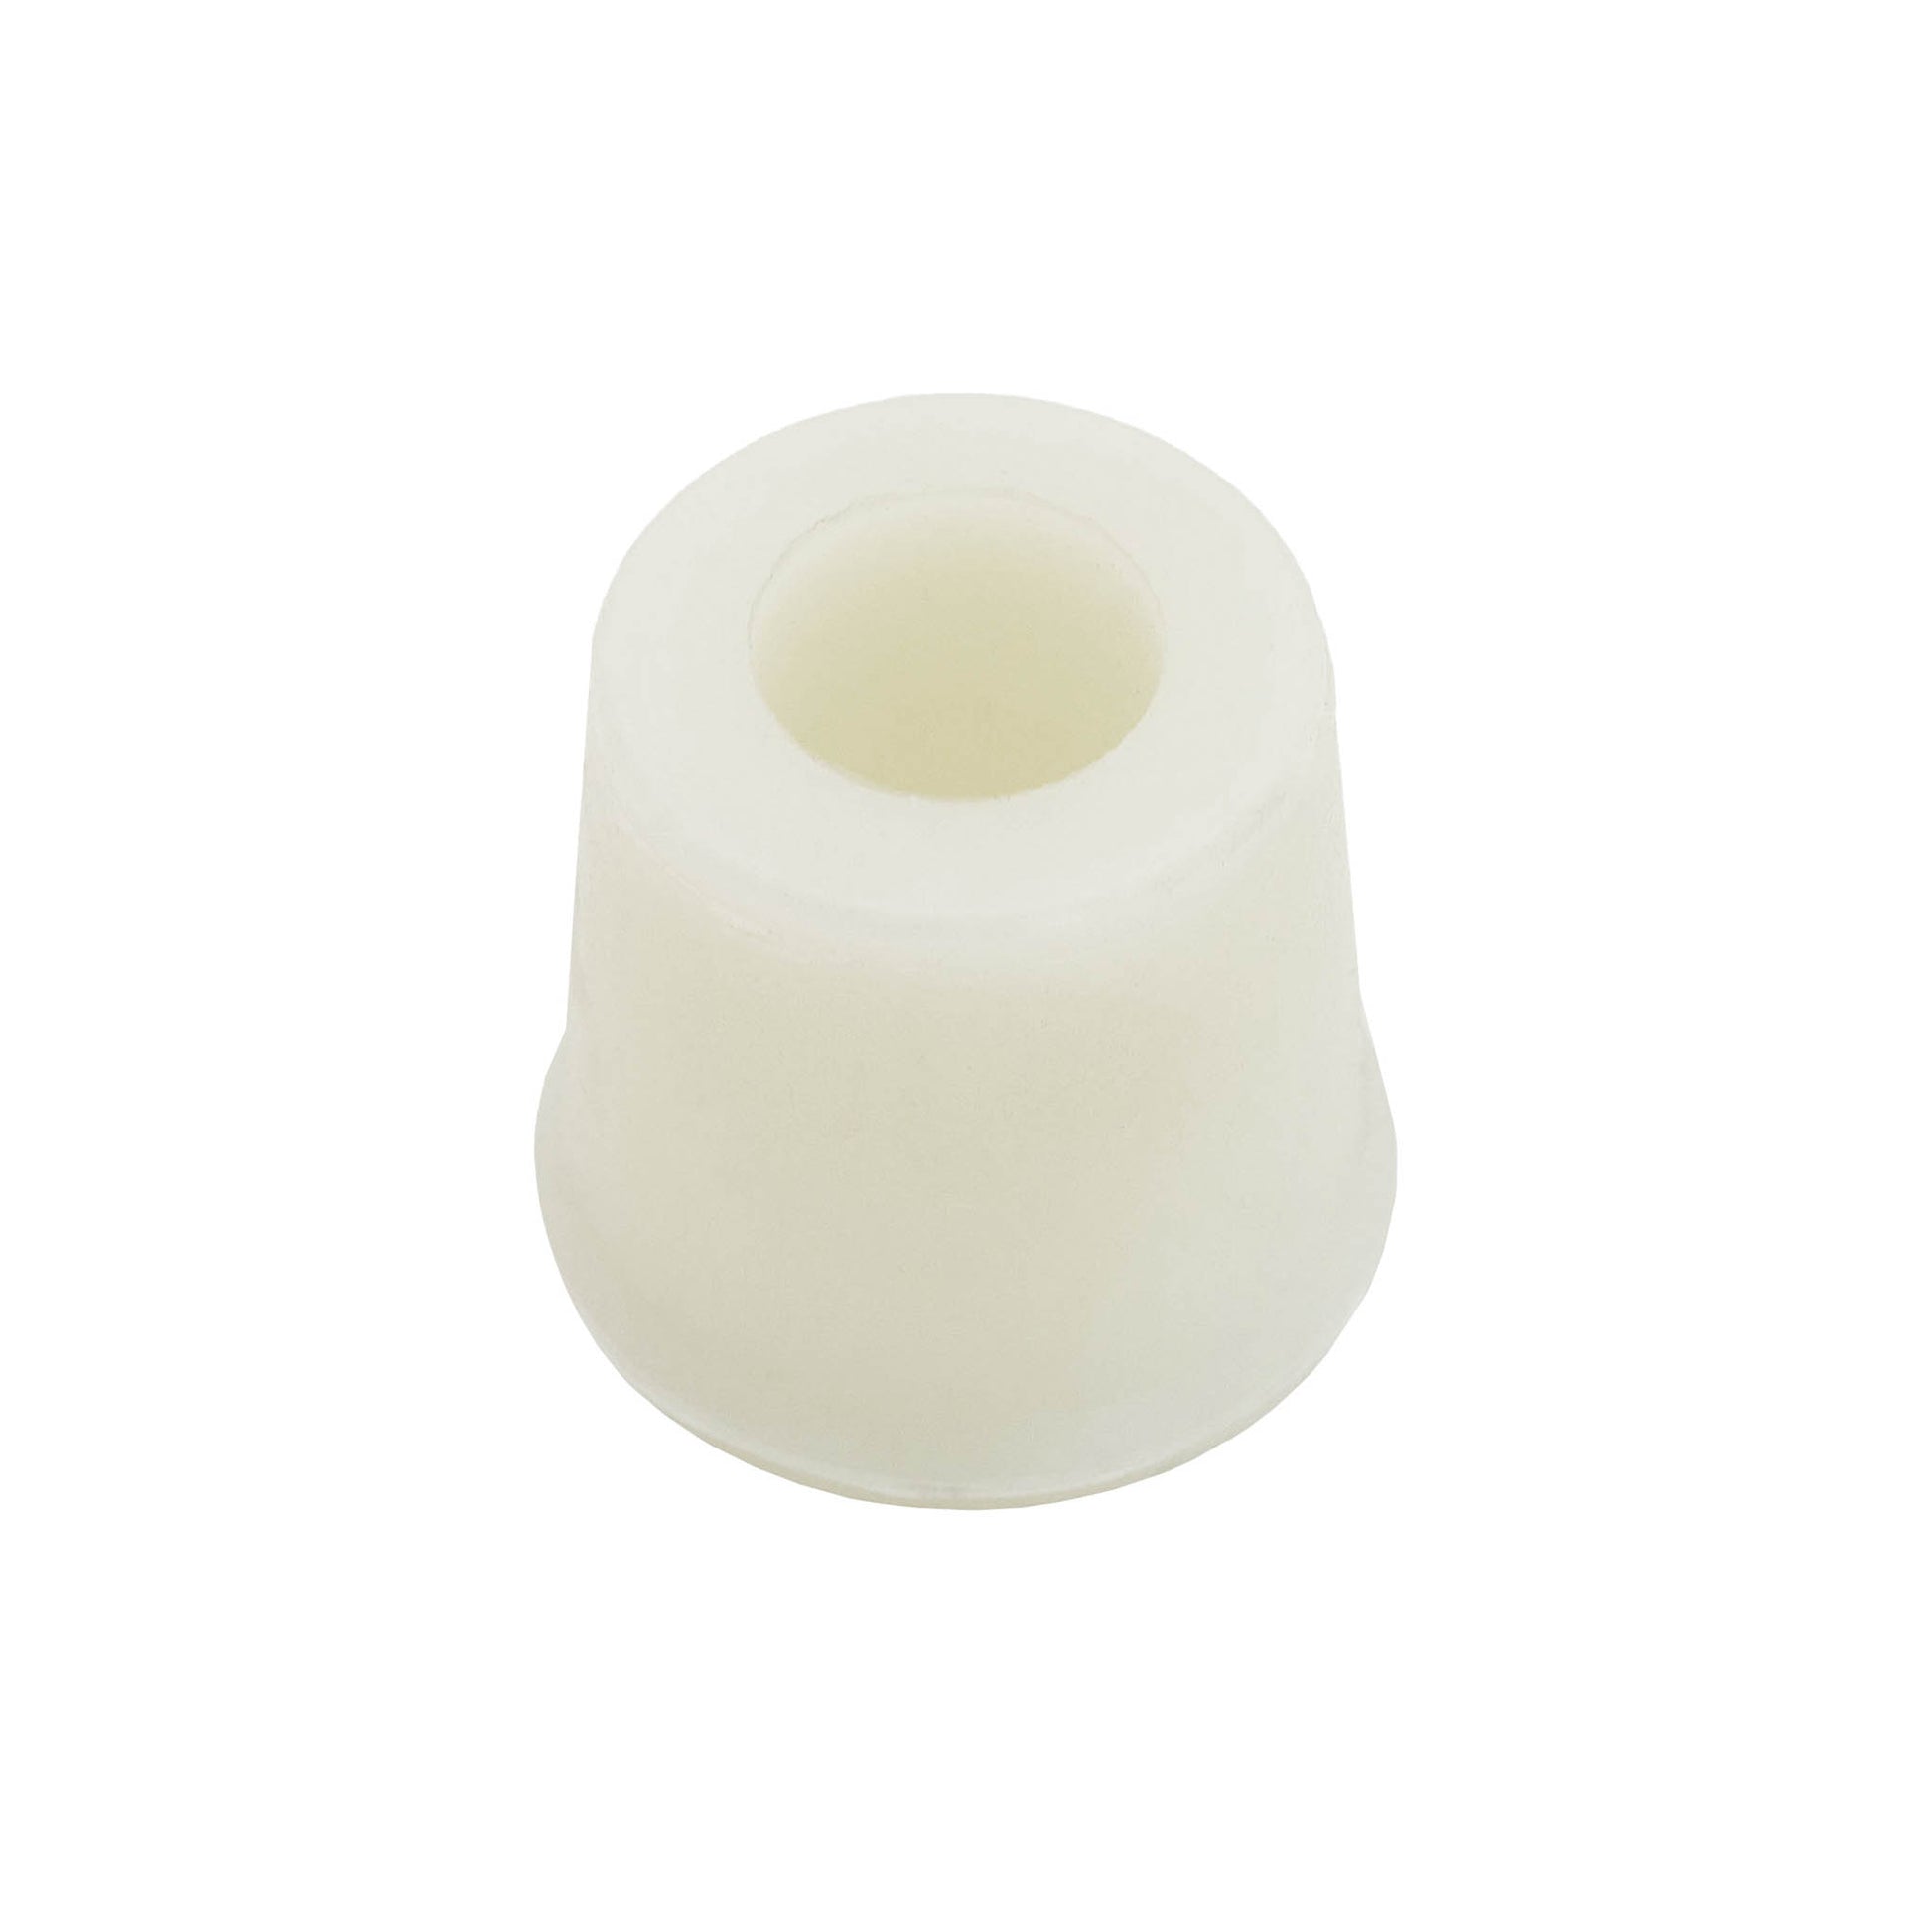 25-33mm silicone bung used in wine, beer and cider making, and fermenting.